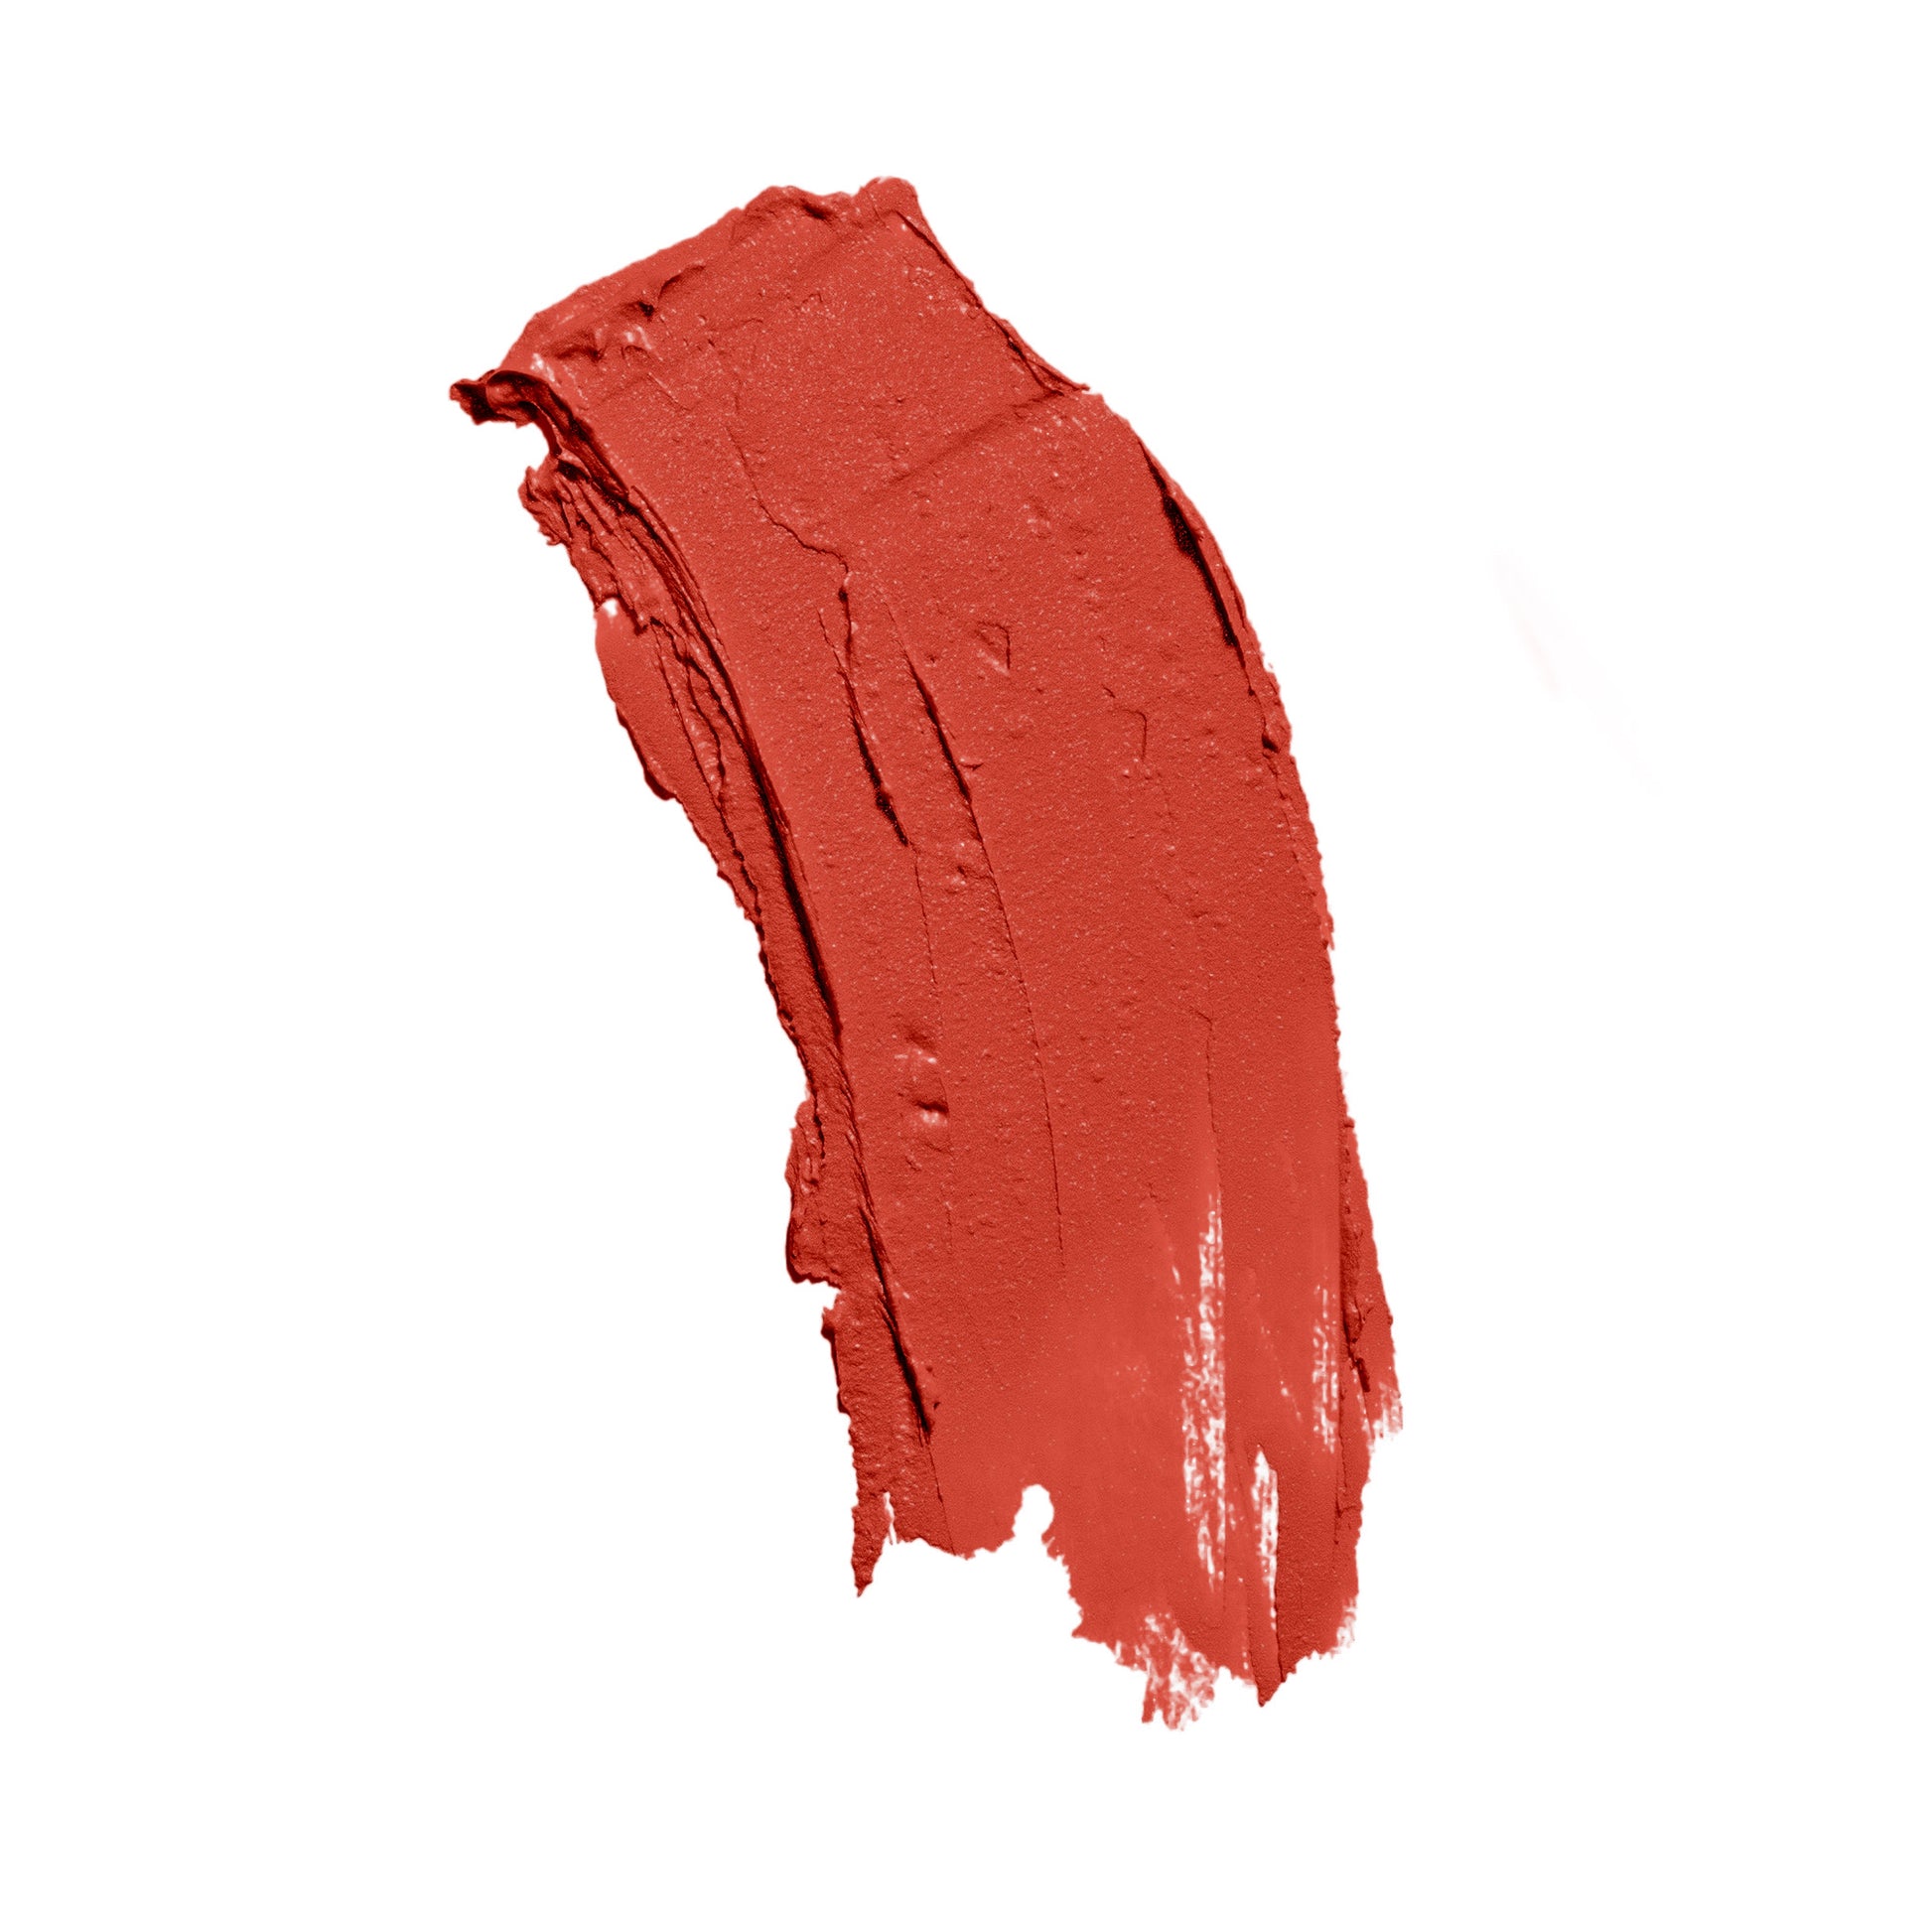 Satin lipstick with a vibrant orange red hue and smudge detail from Natural-Cruelty-Free line